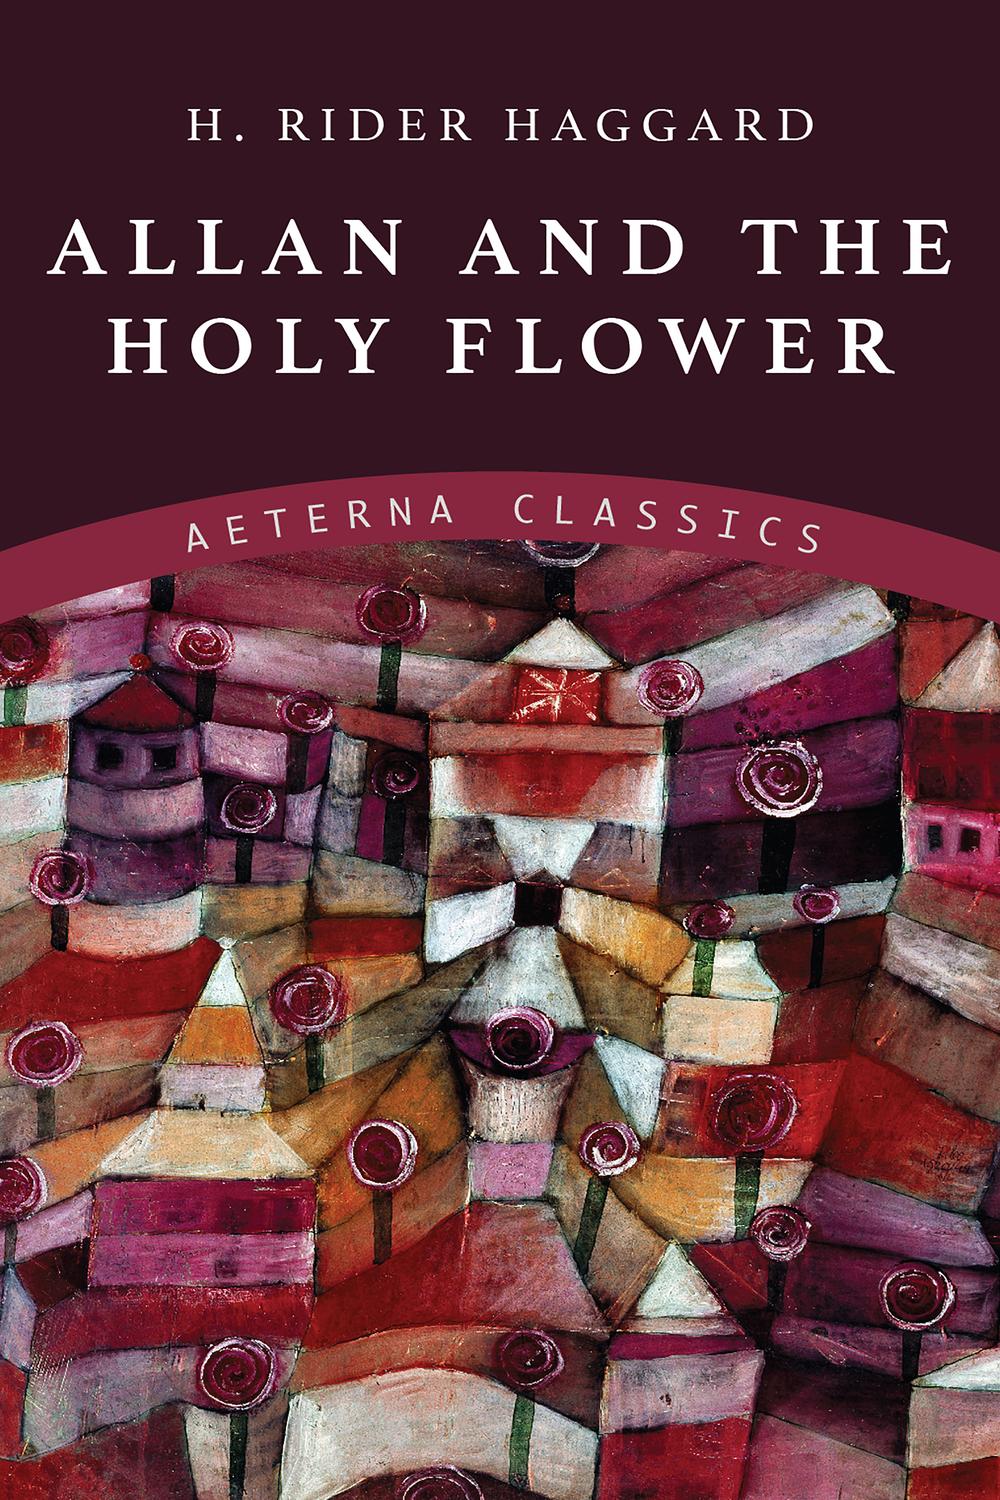 Allan and the Holy Flower - H. Rider Haggard,,